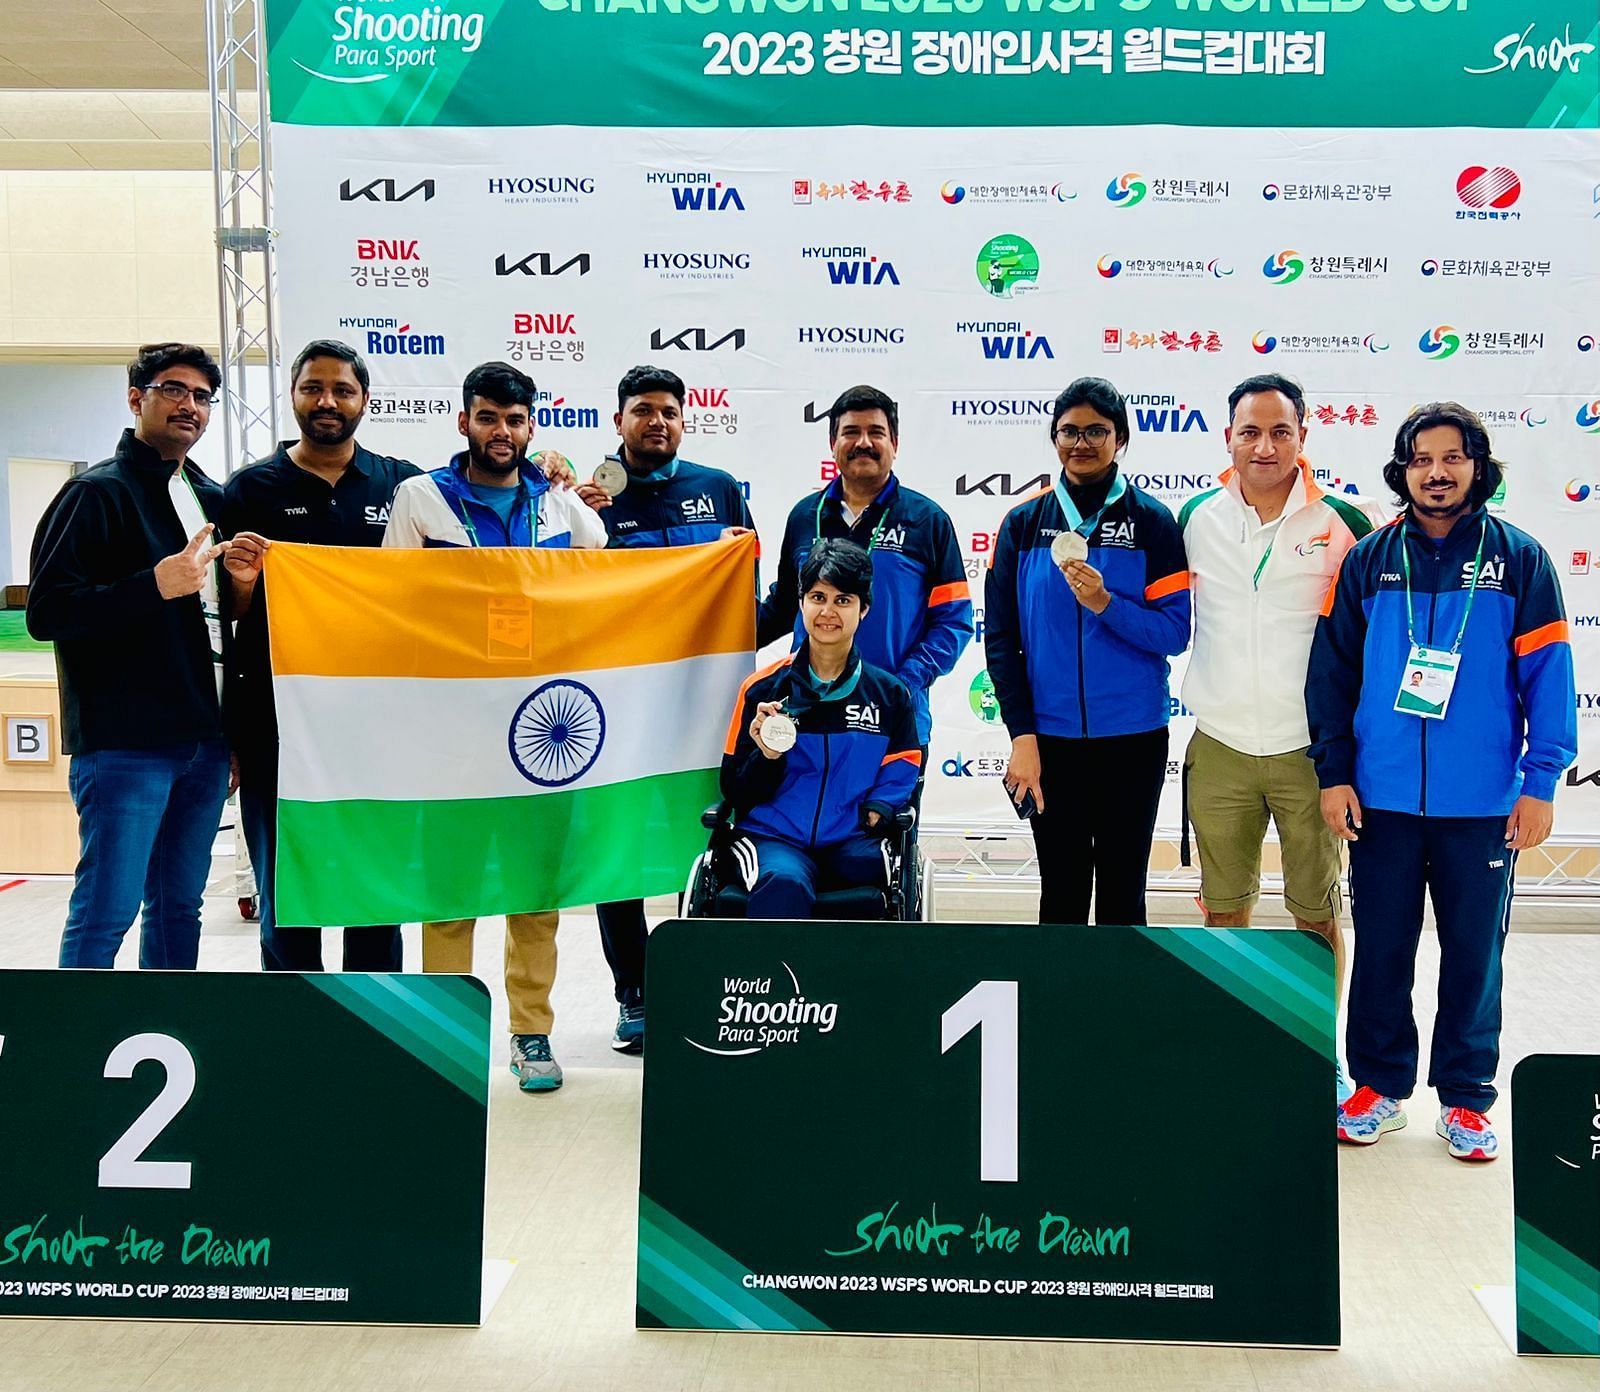 Indian Shooters Claim Medals and Ignite Global Inspiration at Changwon WSPS World Cup 2023